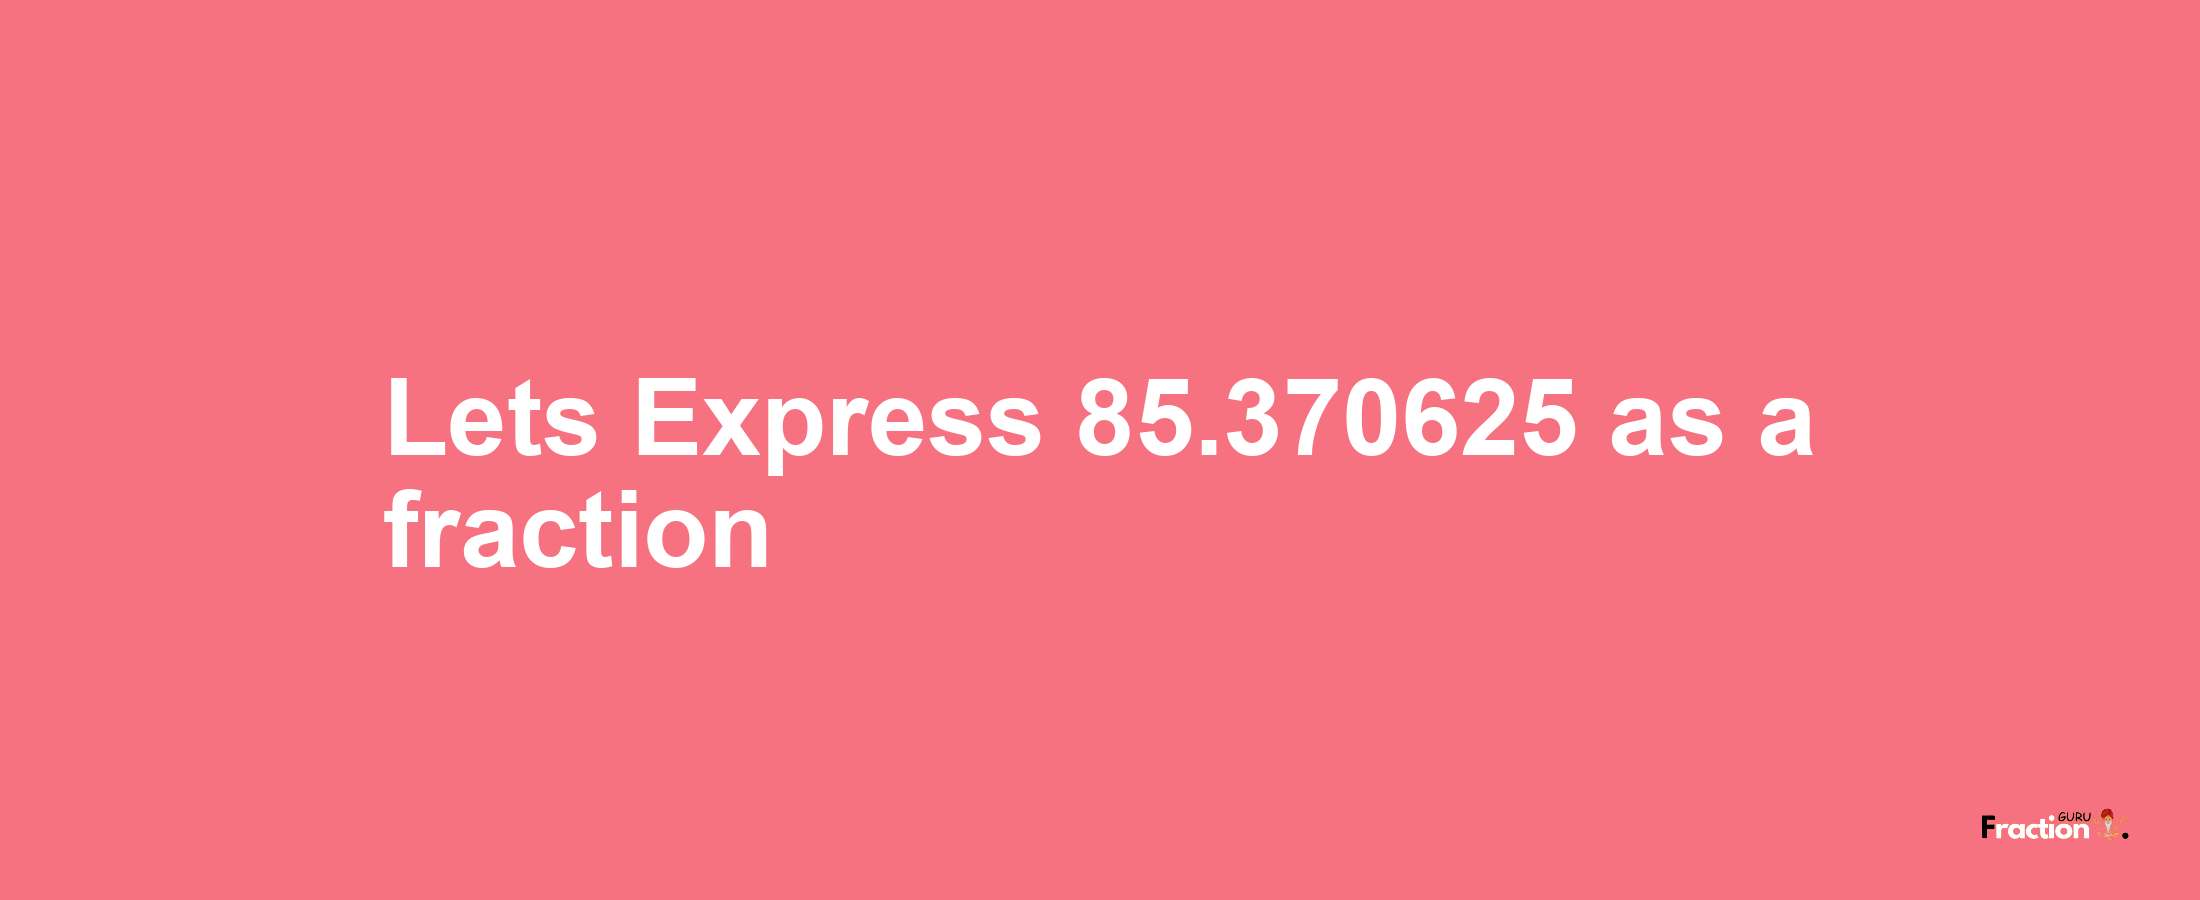 Lets Express 85.370625 as afraction